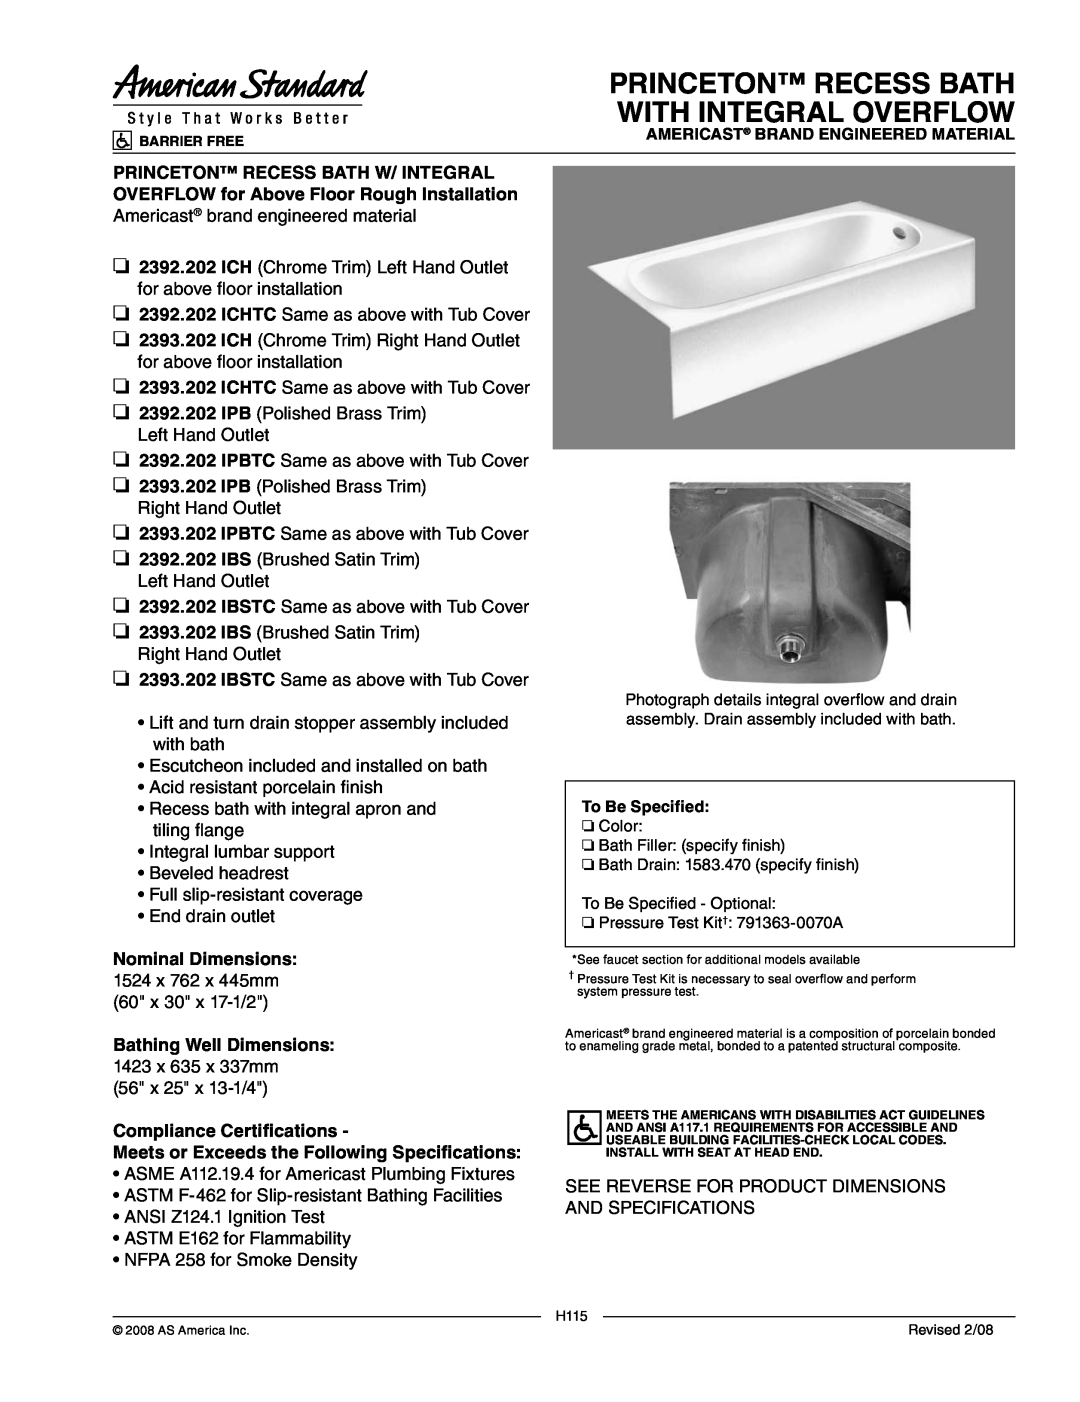 American Standard 2393.202 ICHTC dimensions Princeton Recess Bath With Integral Overflow, Nominal Dimensions 